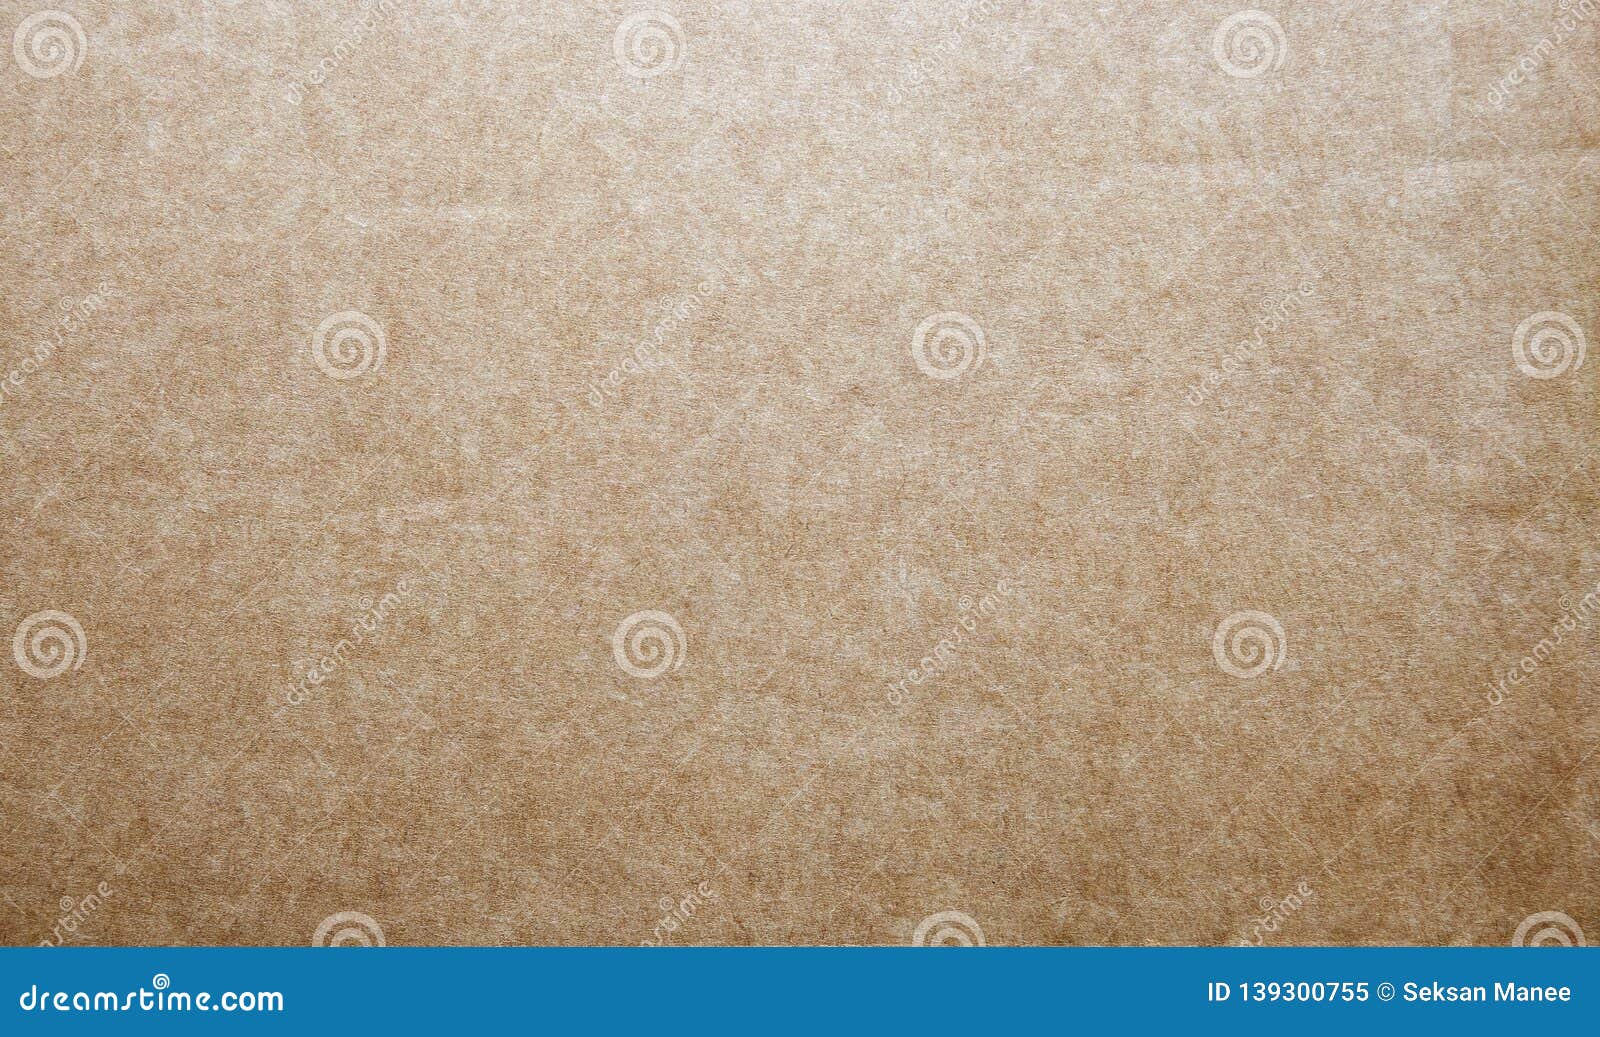  Hard  Brown Kraft Paper  Background With Textures Stock  